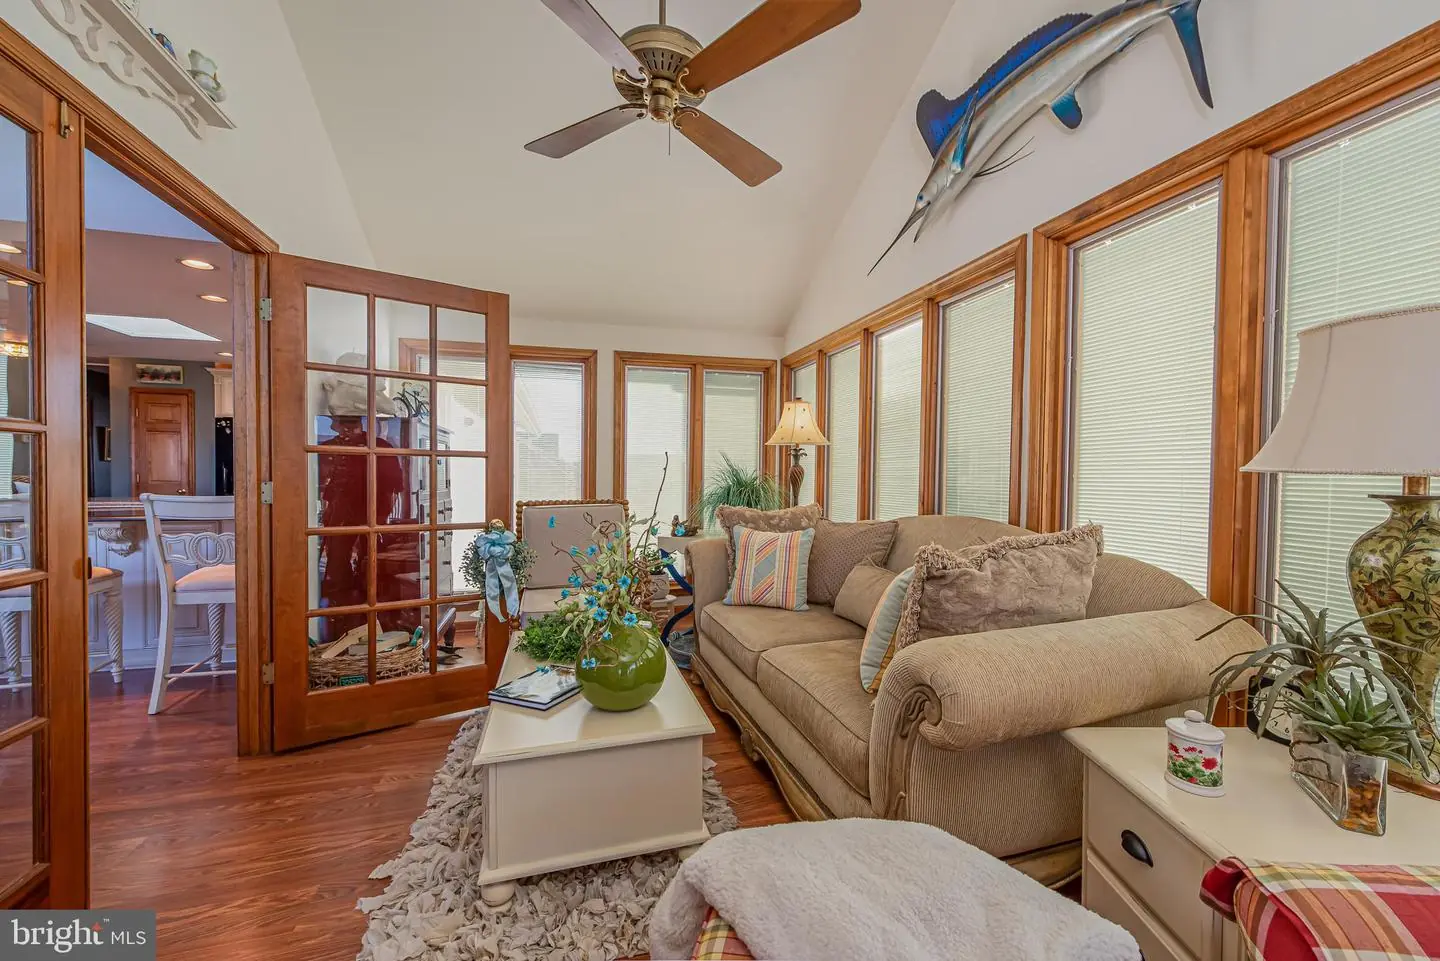 MDWO2019074-802877628122-2024-02-25-13-51-31 154 Old Wharf Rd | Ocean City, MD Real Estate For Sale | MLS# Mdwo2019074  - 1st Choice Properties